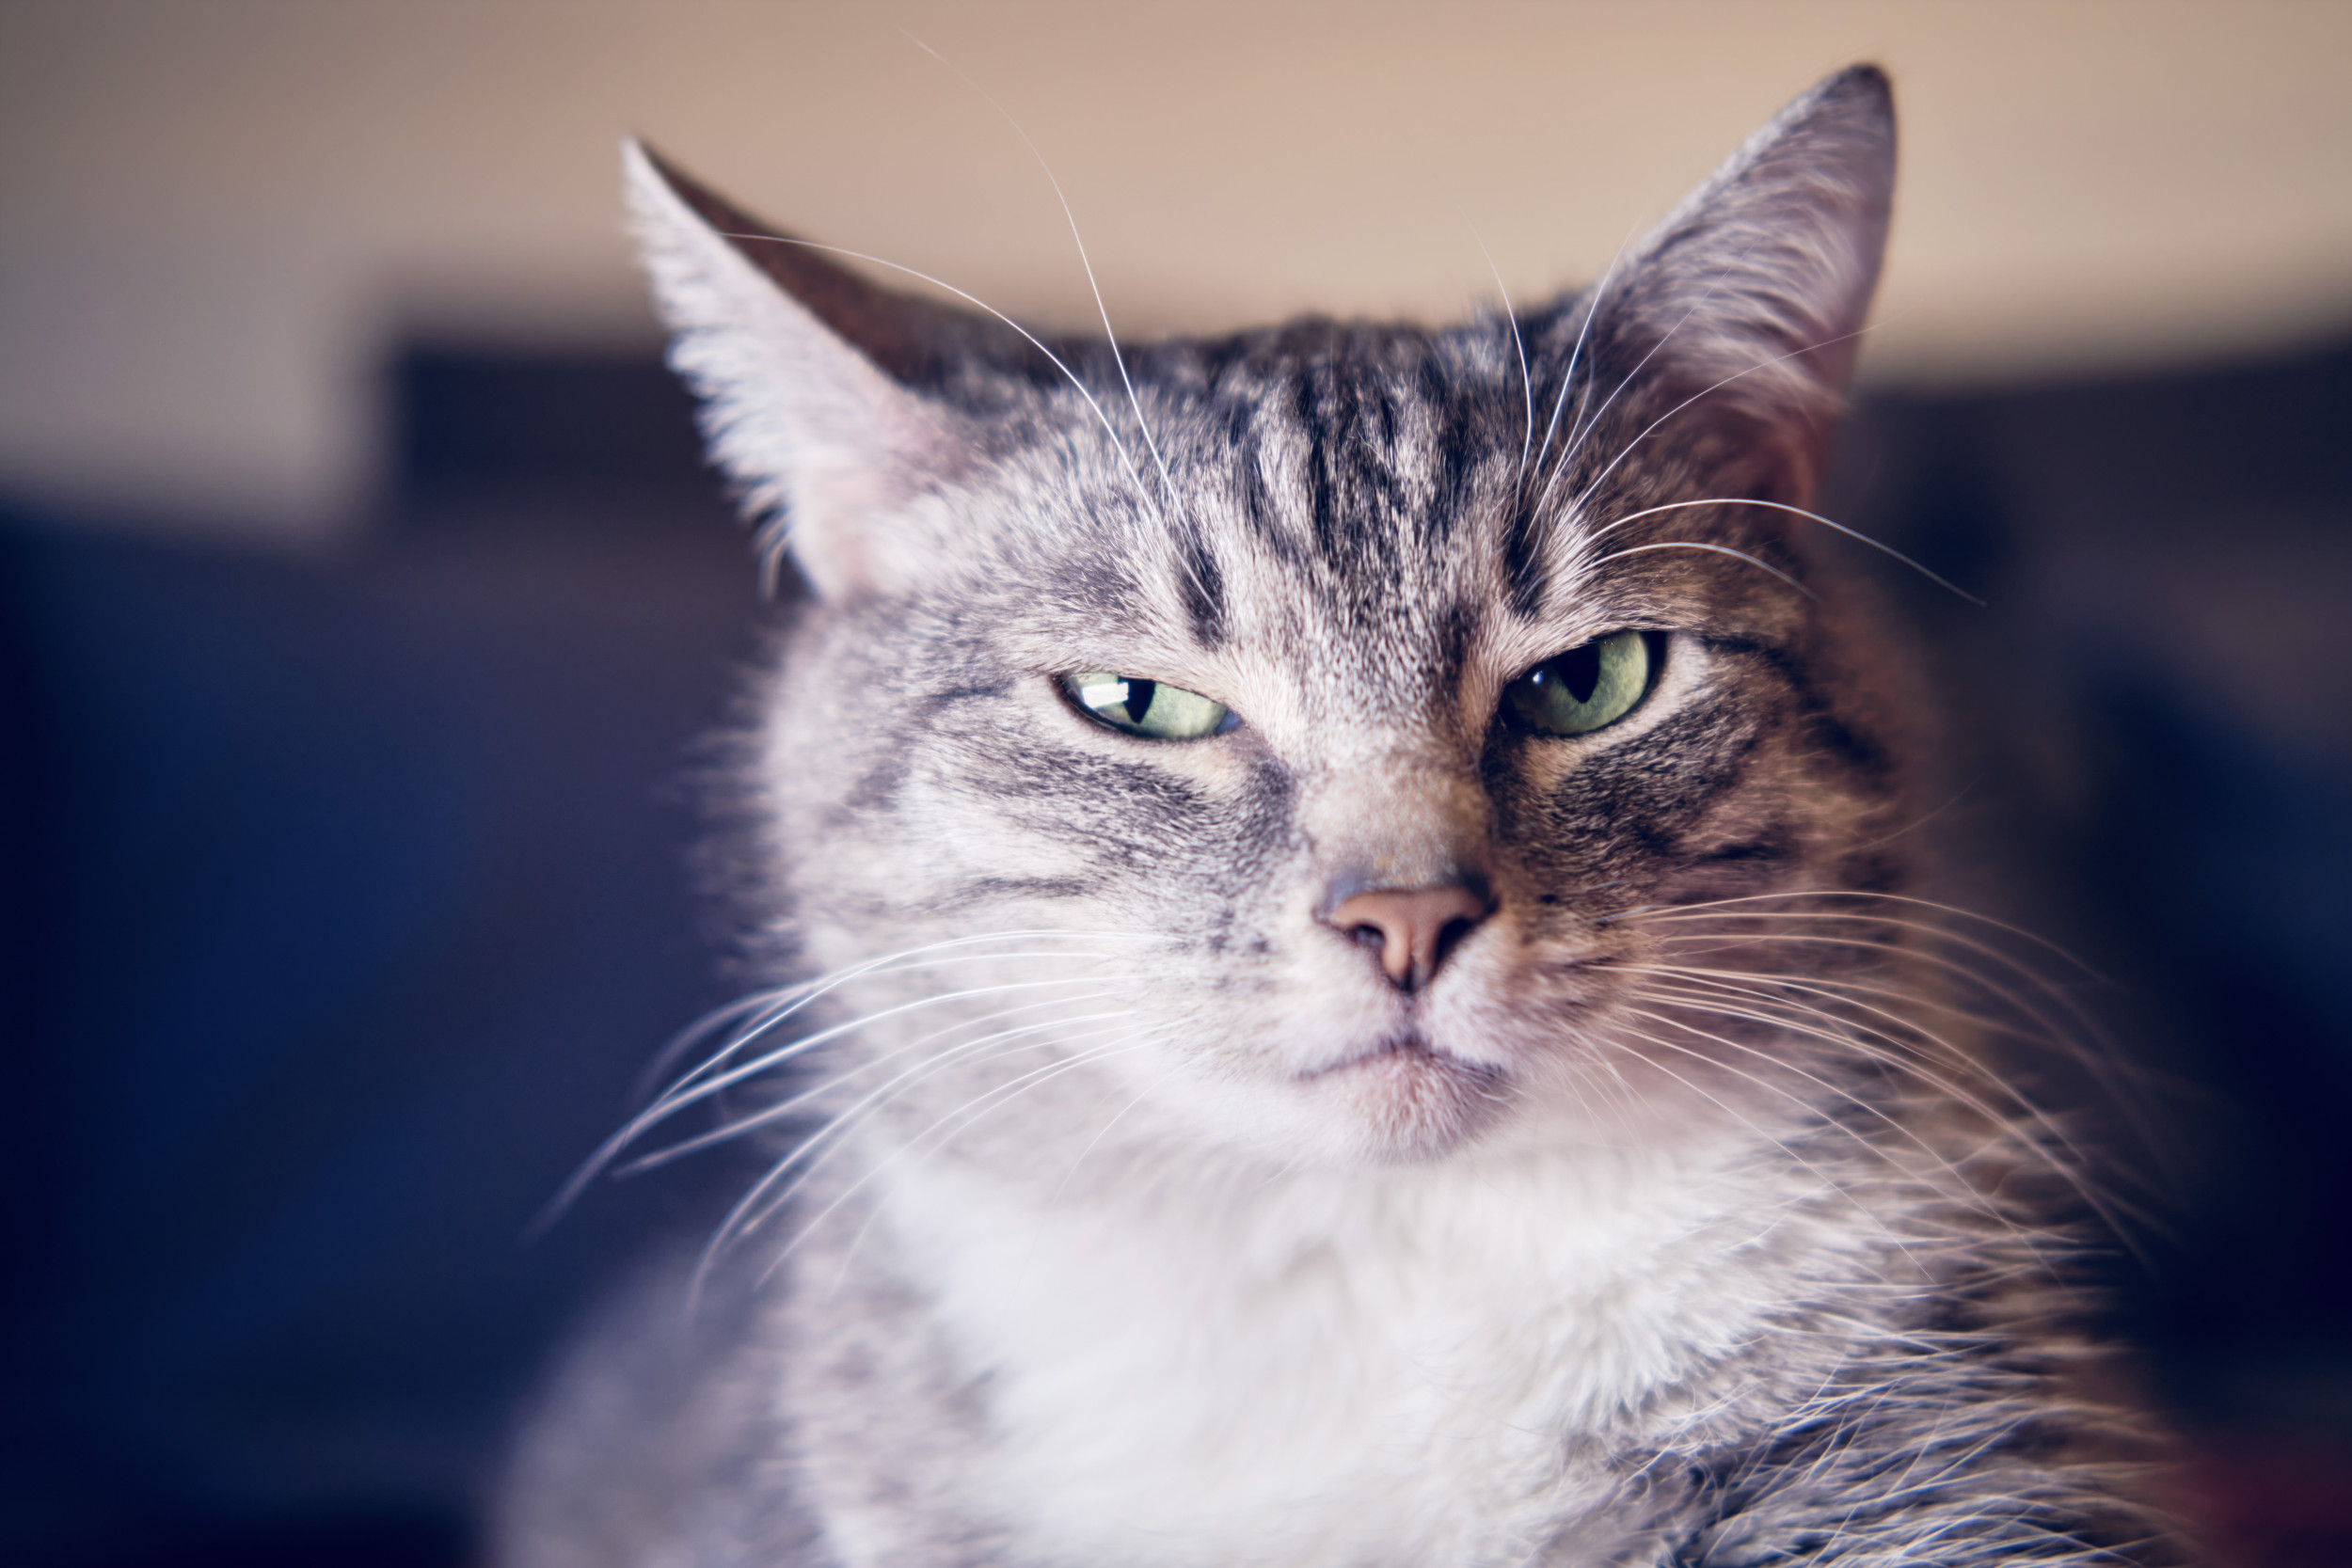 Cat’s Reaction to Sneeze Delights Internet: ‘How Dramatic’